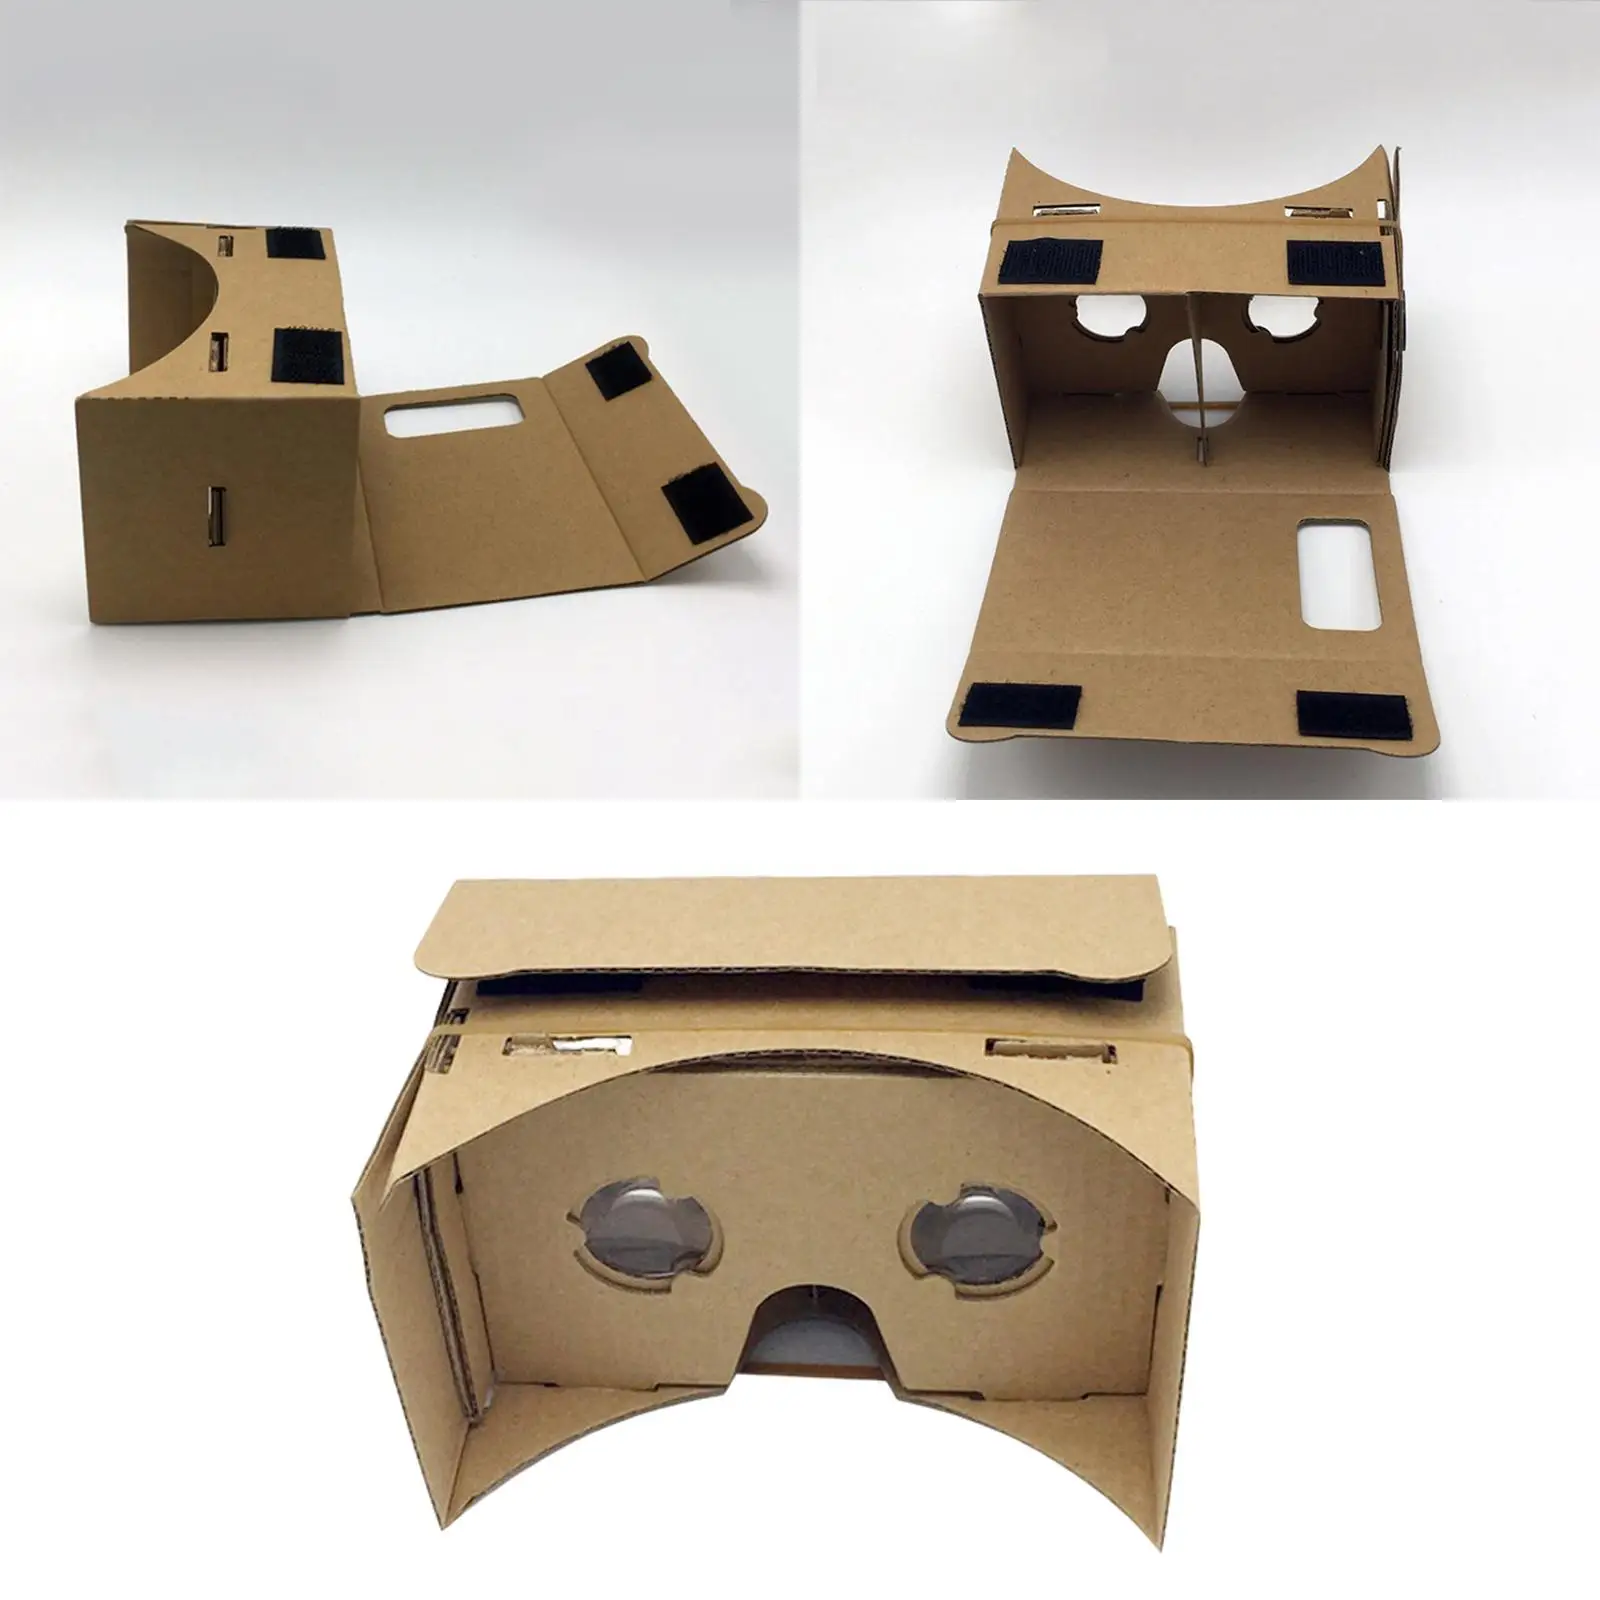 V1 DIY Cardboard for Google VR Case Kit Fits All 3-6 inch Smartphones Comfortable Compact Brown ,Lots of Content to Explore